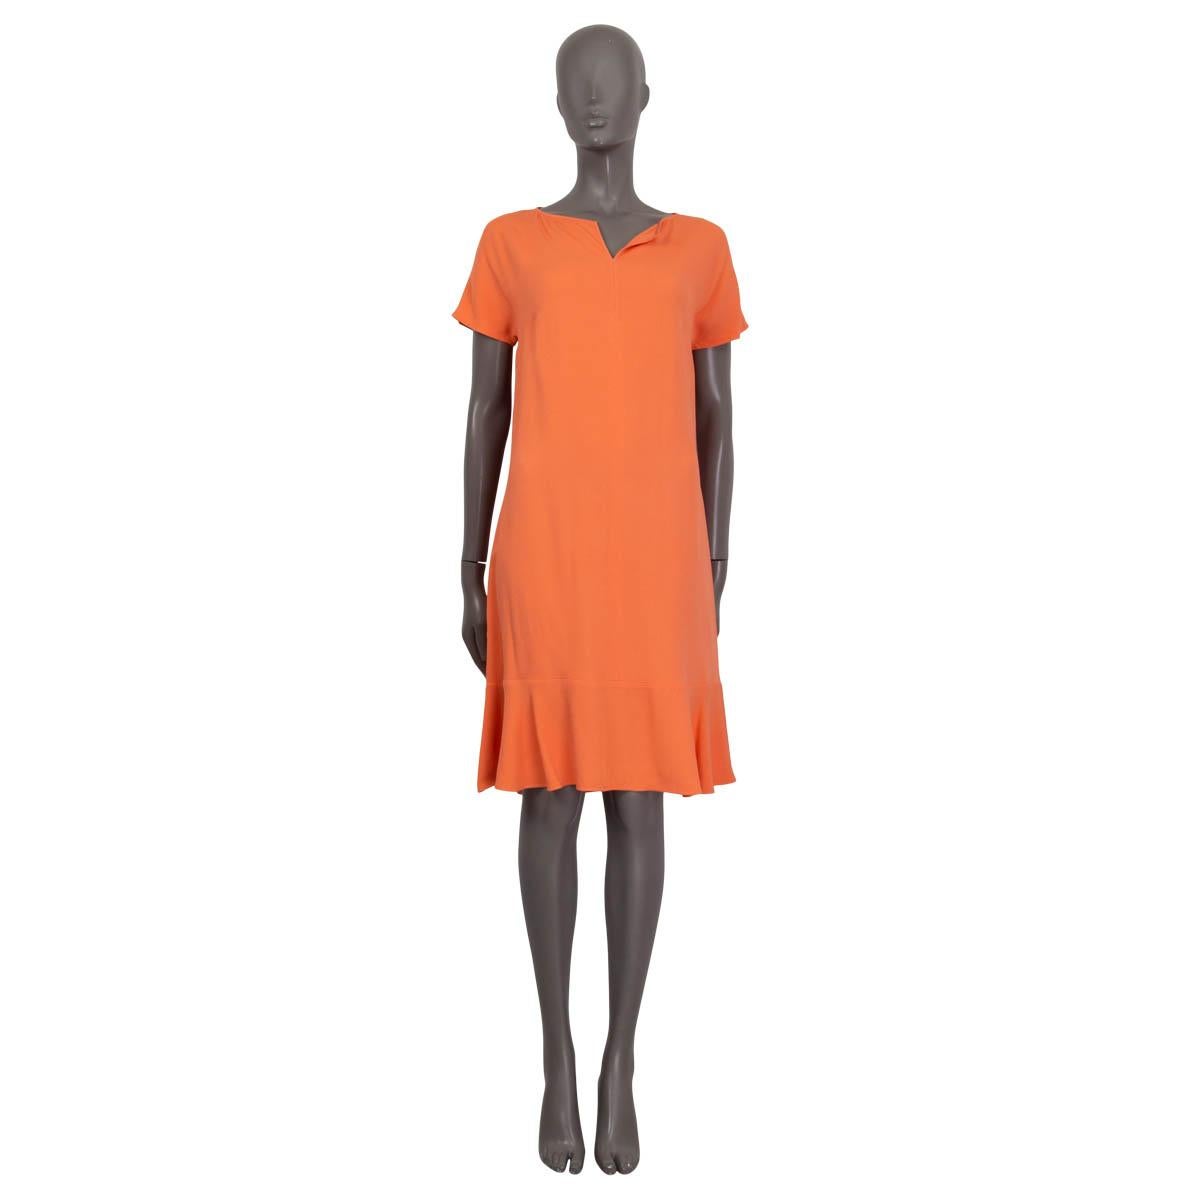 100% authentic Stella McCartney Resort 2016 'Cinthy' dress in light orange viscose (64%), acetate (32%) and elastane (4%). Features a slit at the front neck and short raglan sleeves (sleeve measurements taken from the neck). Unlined. Has been worn